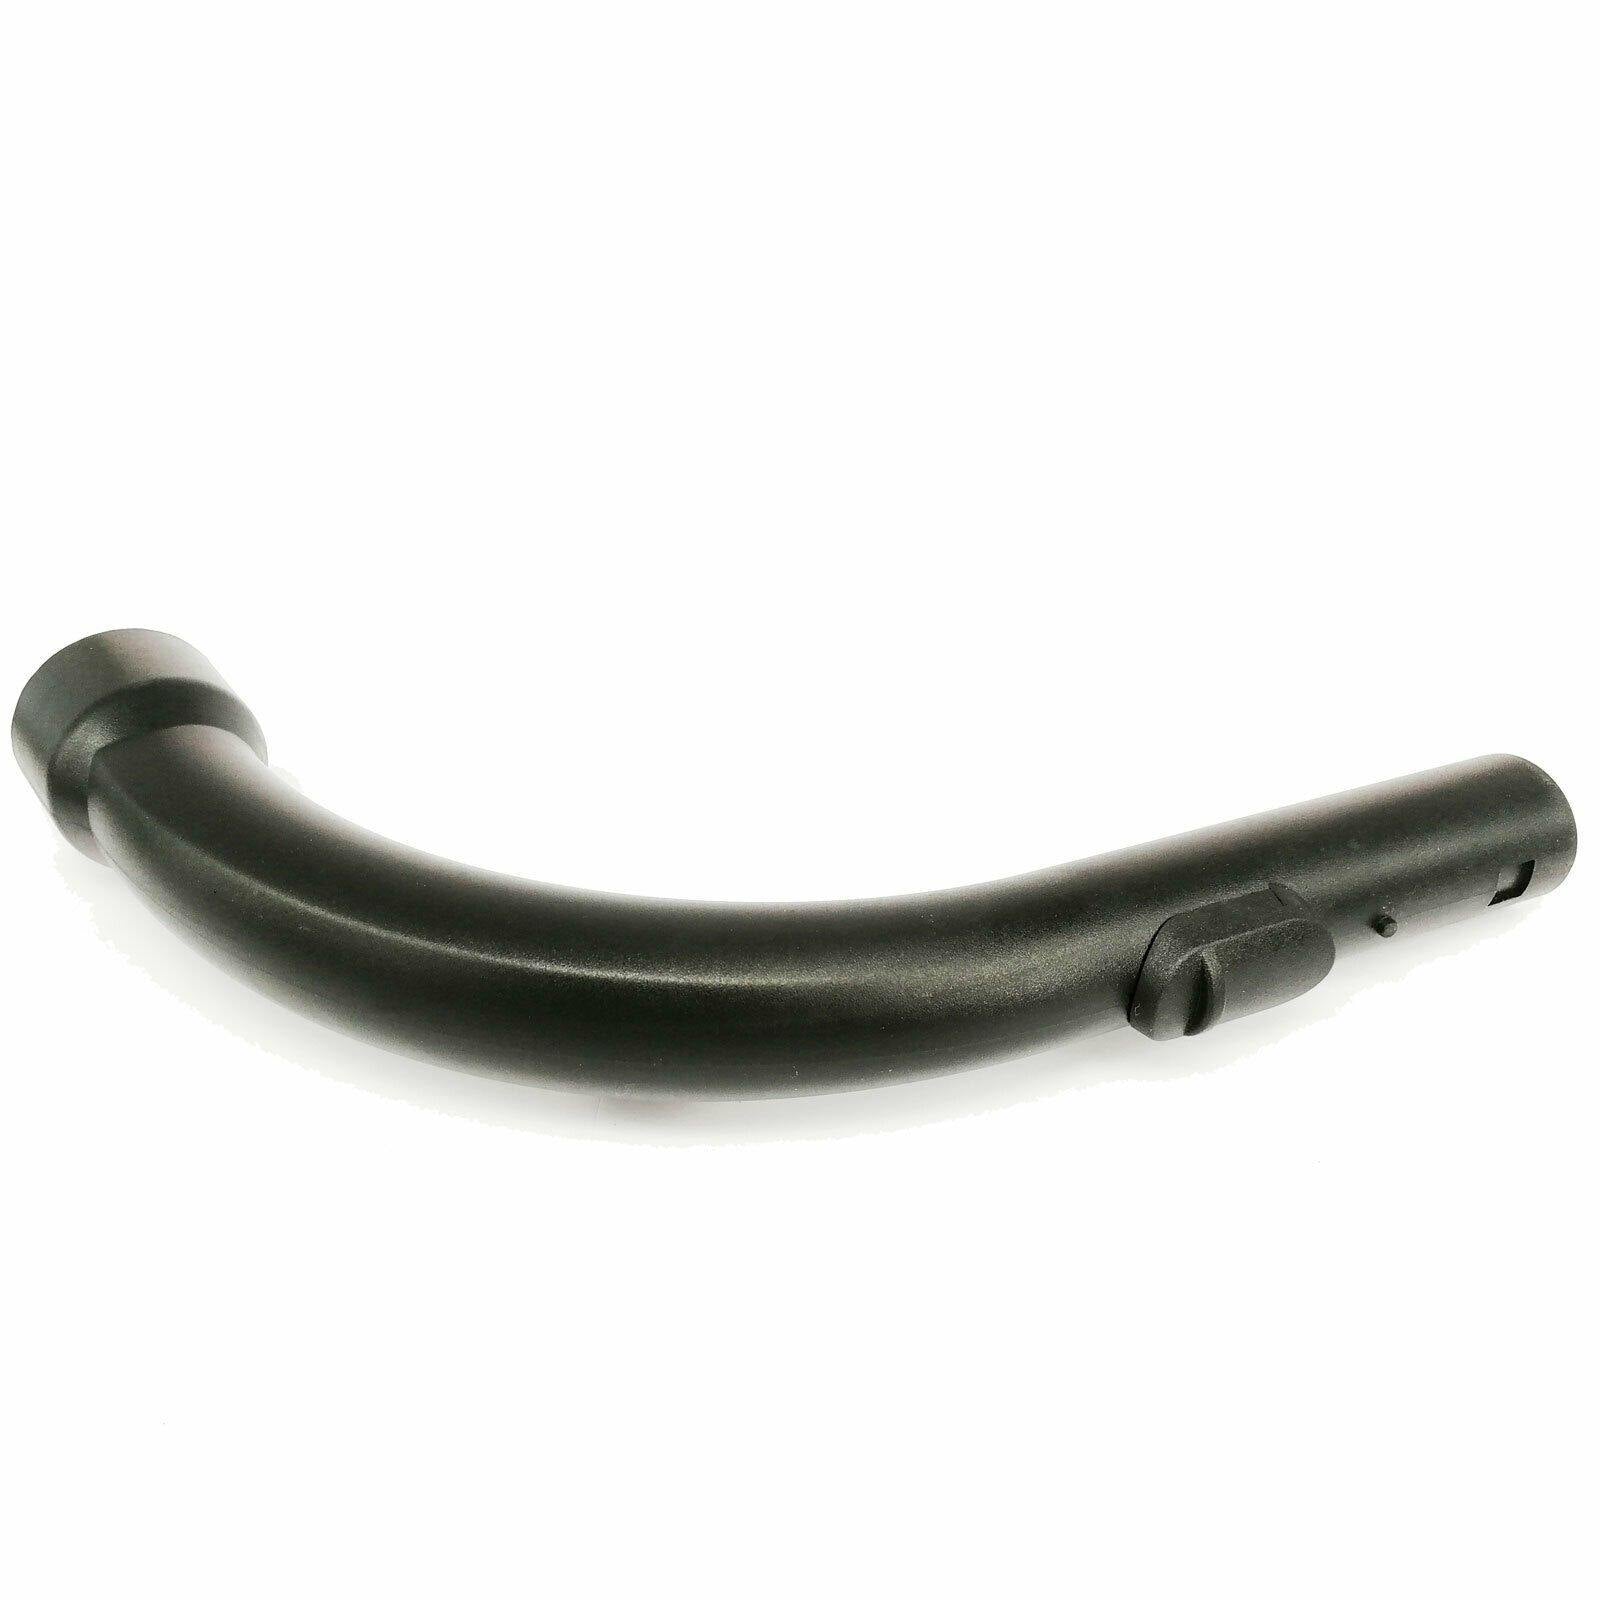 Hose Bent End Curved Handle For Miele S8310, S8320, S8330, S8340, S8360 Ecoline Sparesbarn